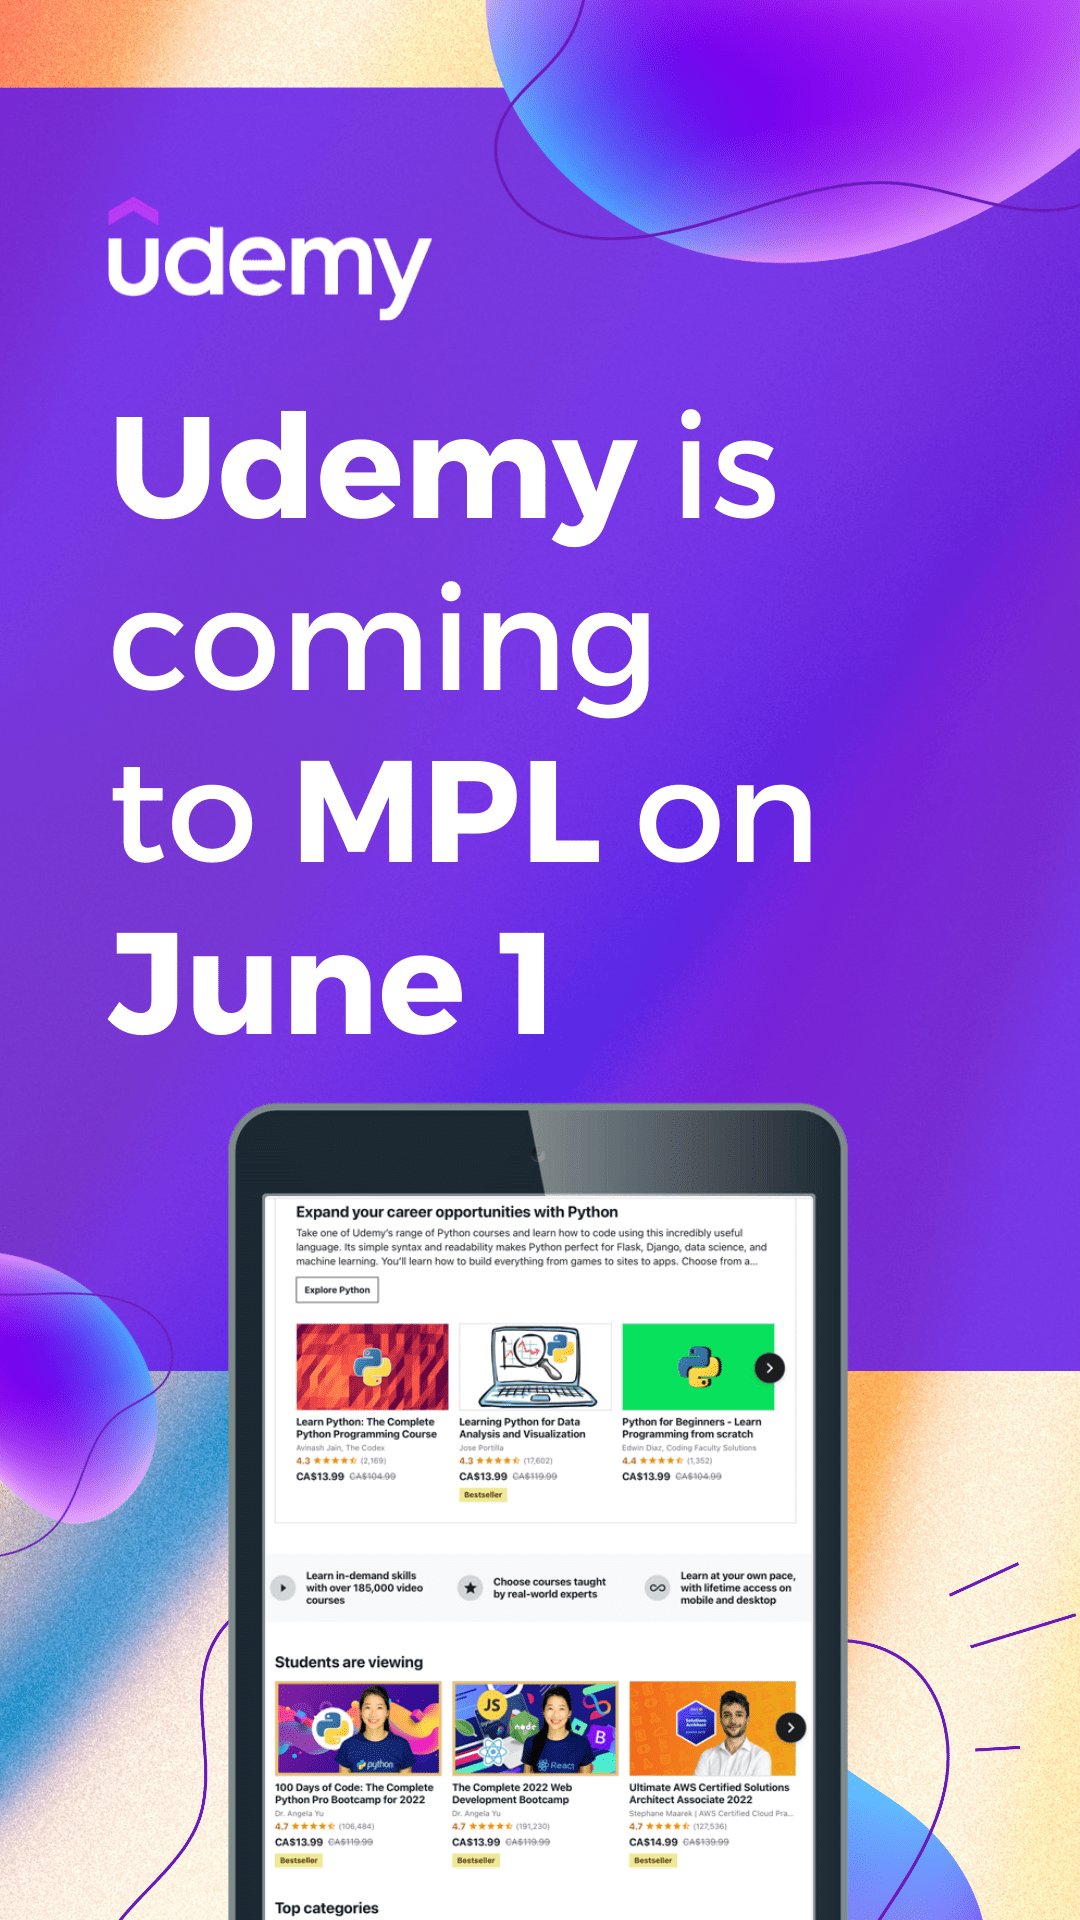 UDEMY is coming to MPL on June 1